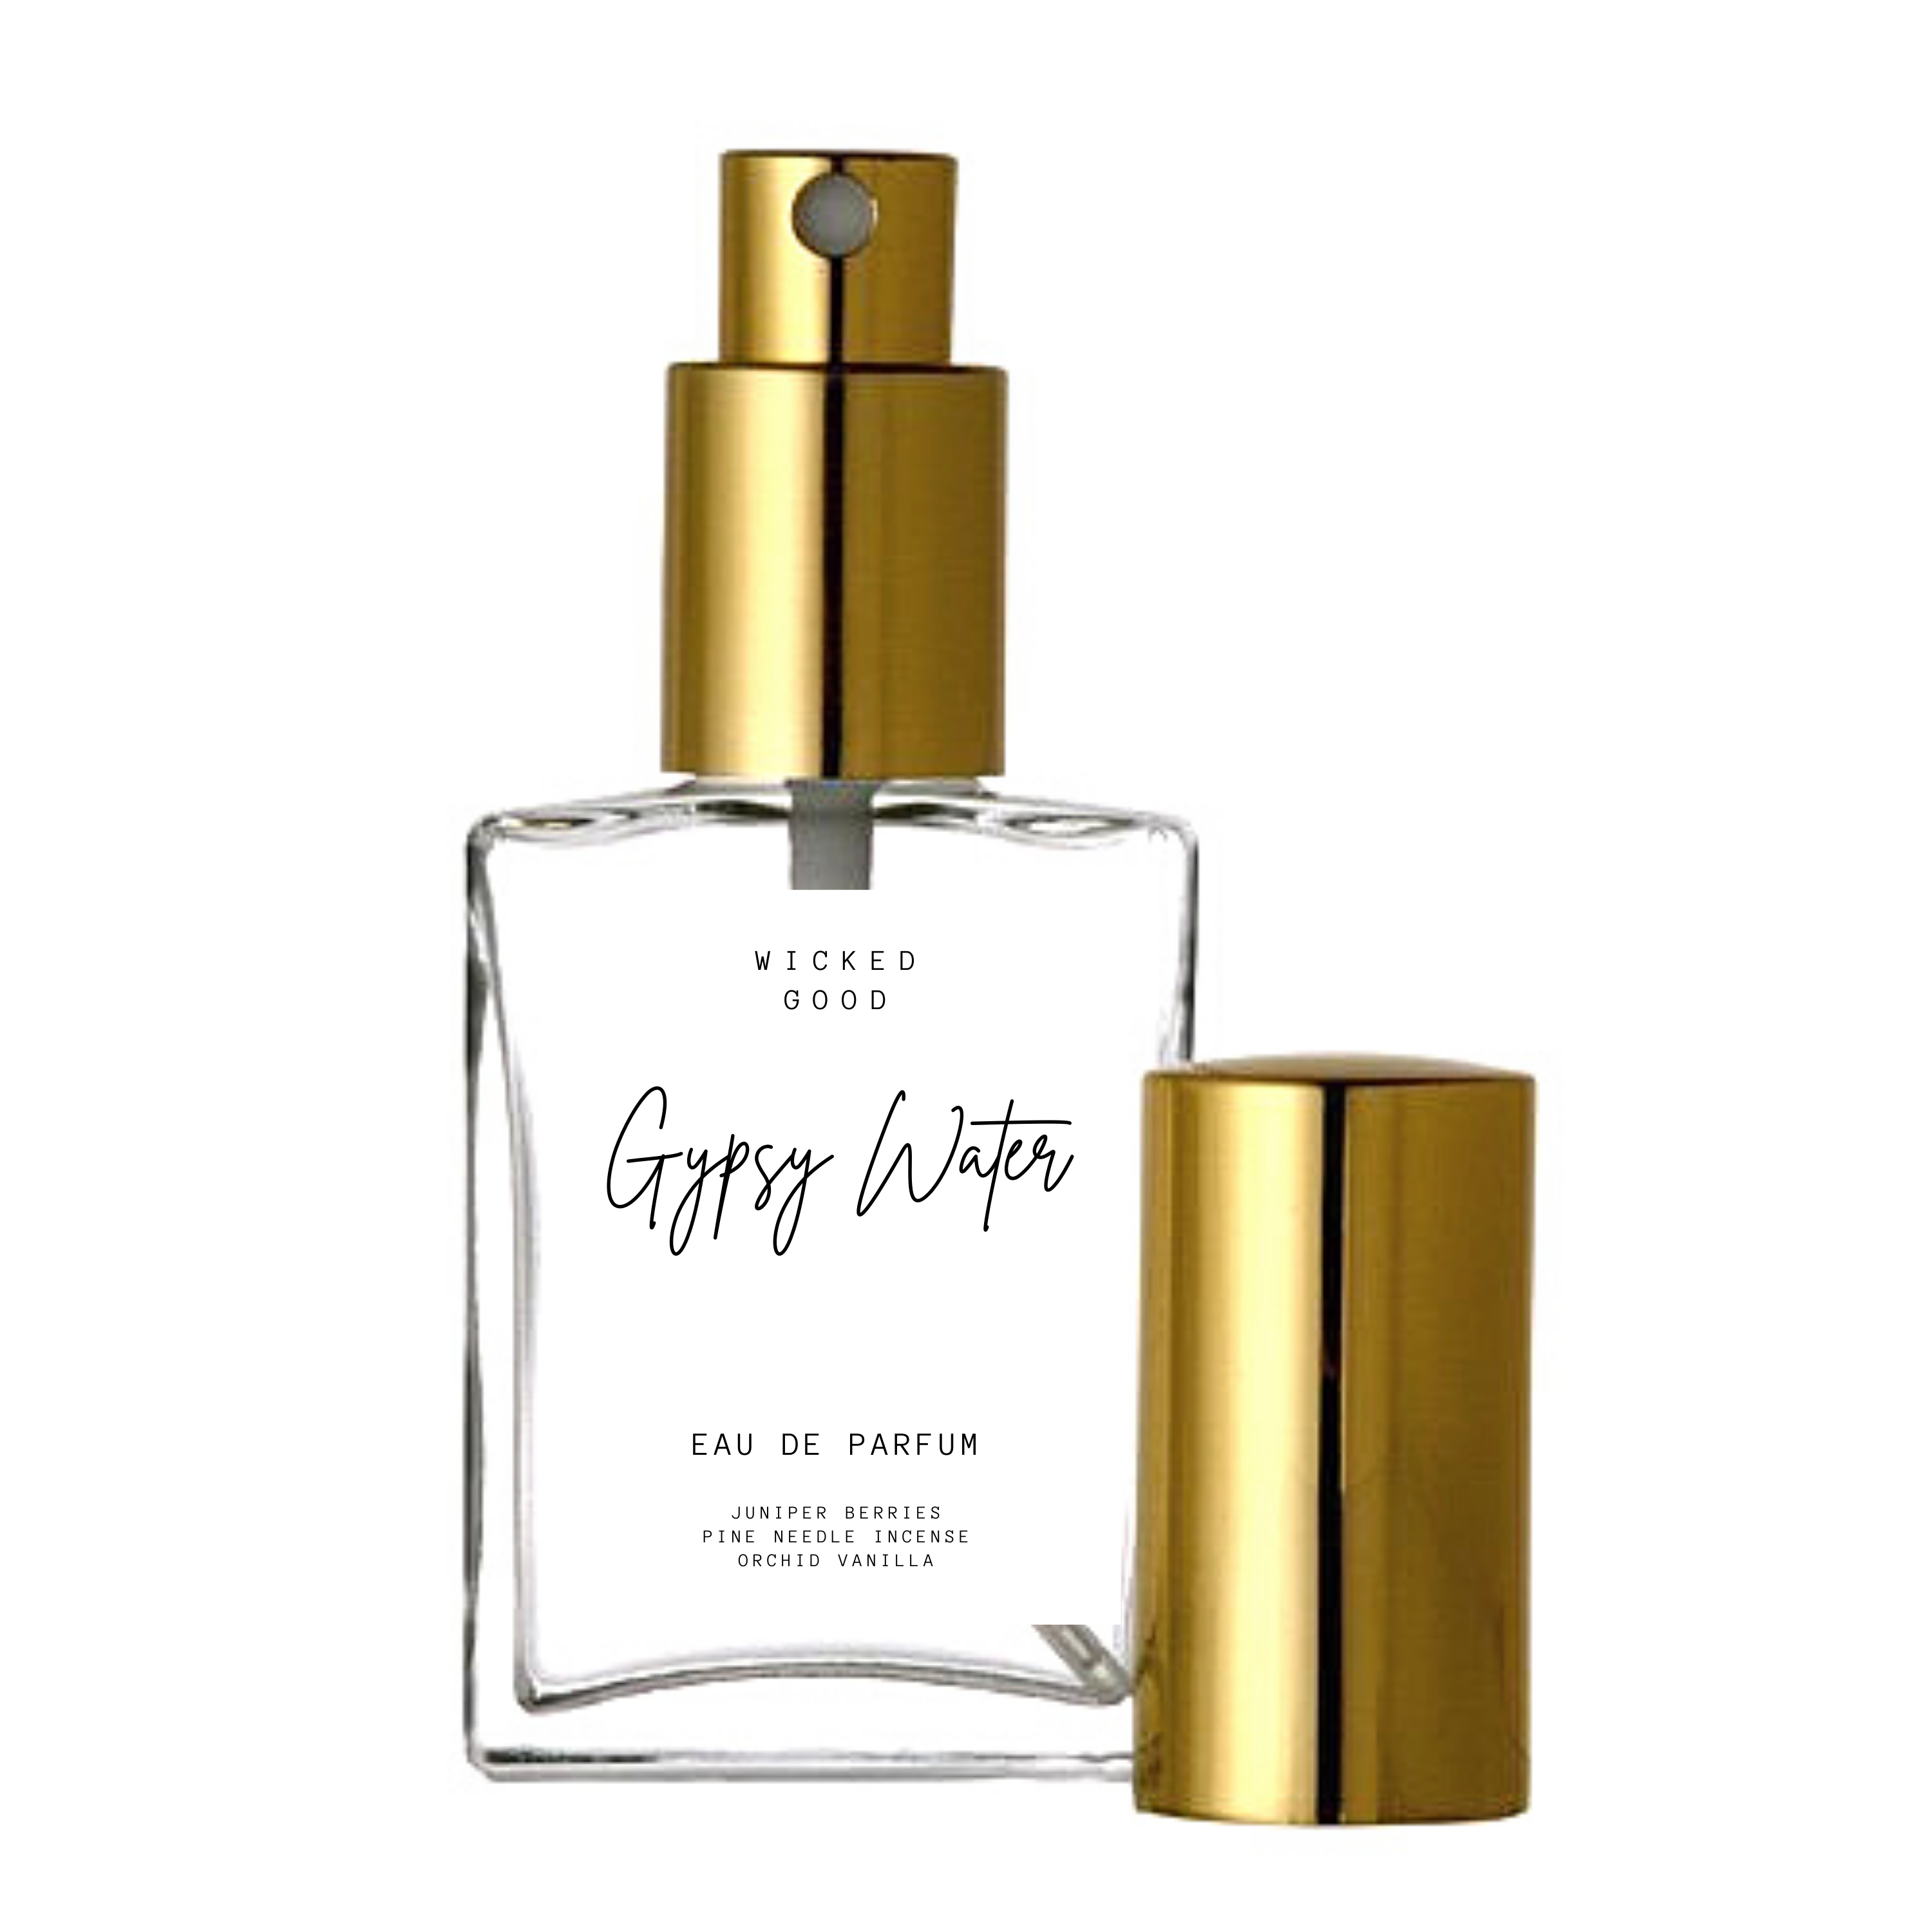 50 Best Dupes for Gypsy Water Body Wash by Byredo